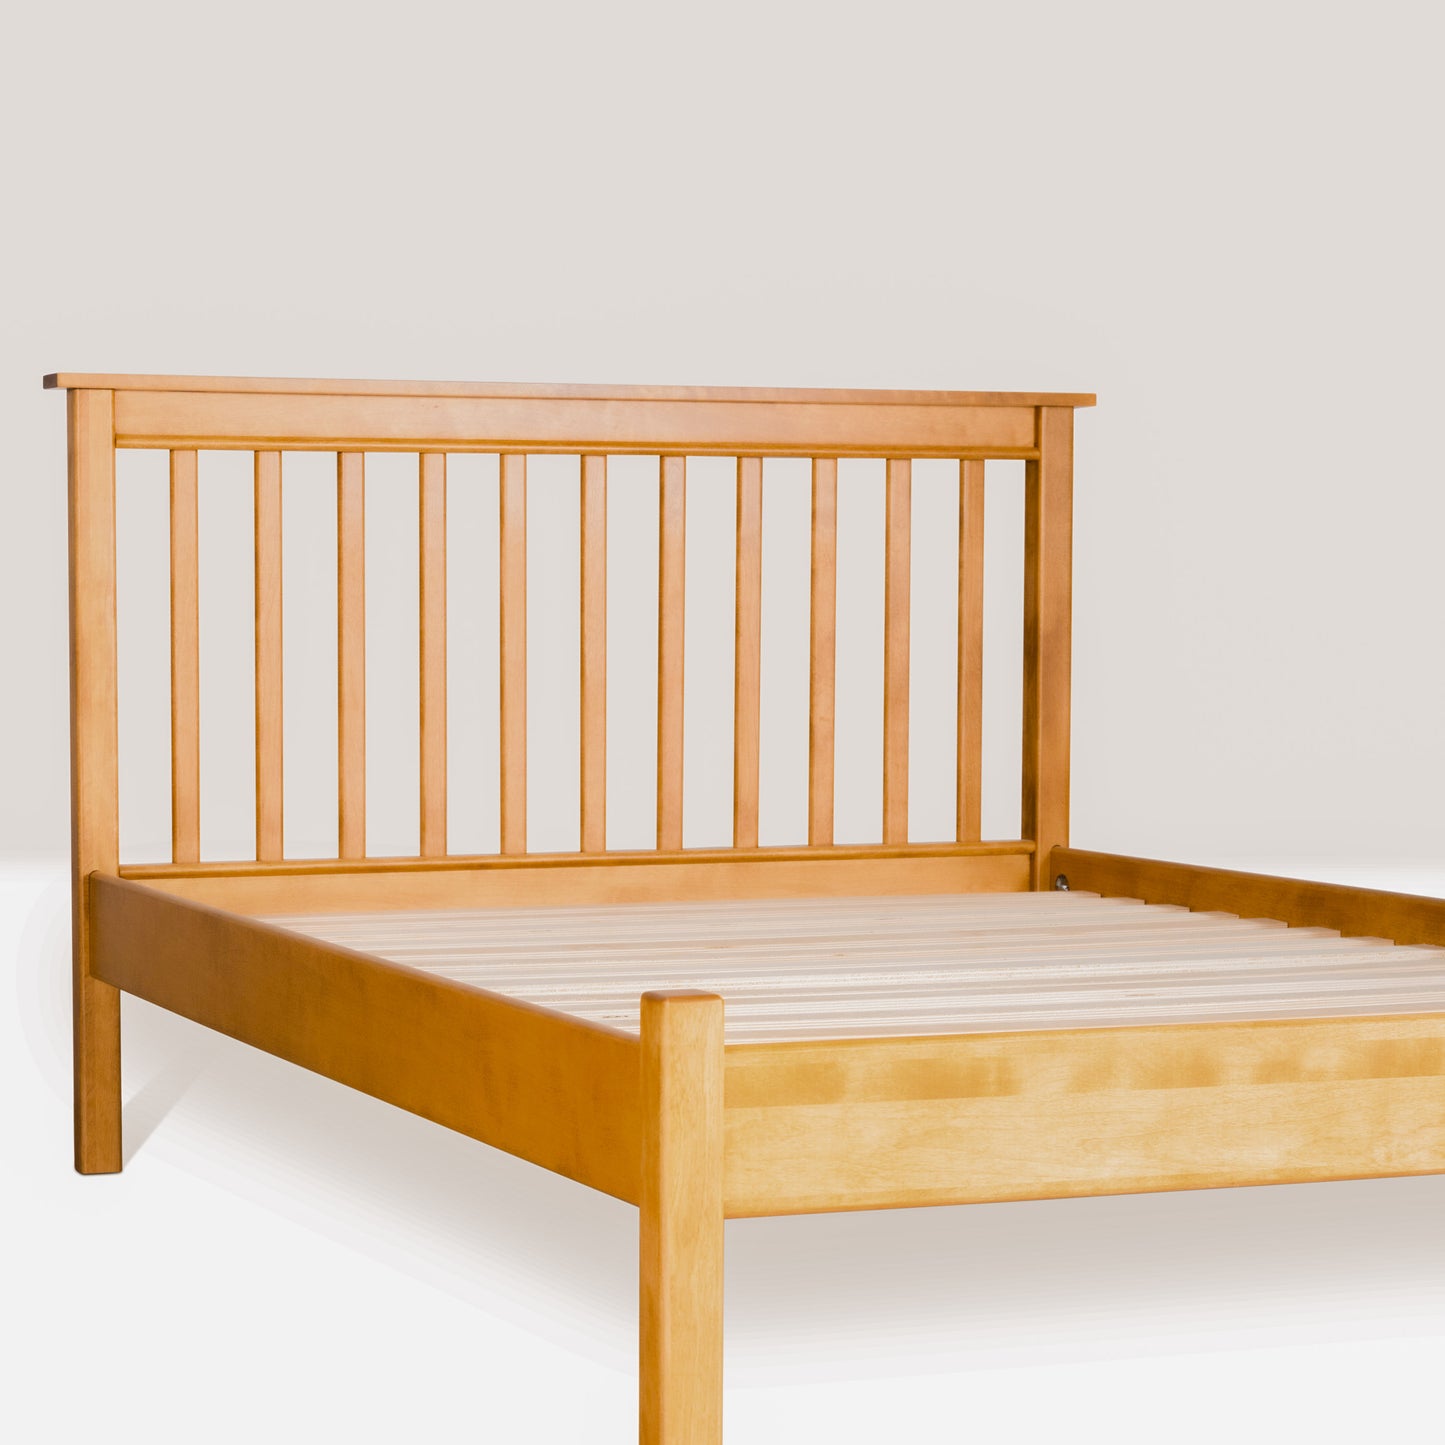 Acadia Shaker Platform Bed in Autumn Gold finish. Pictured at angle to show headboard details.